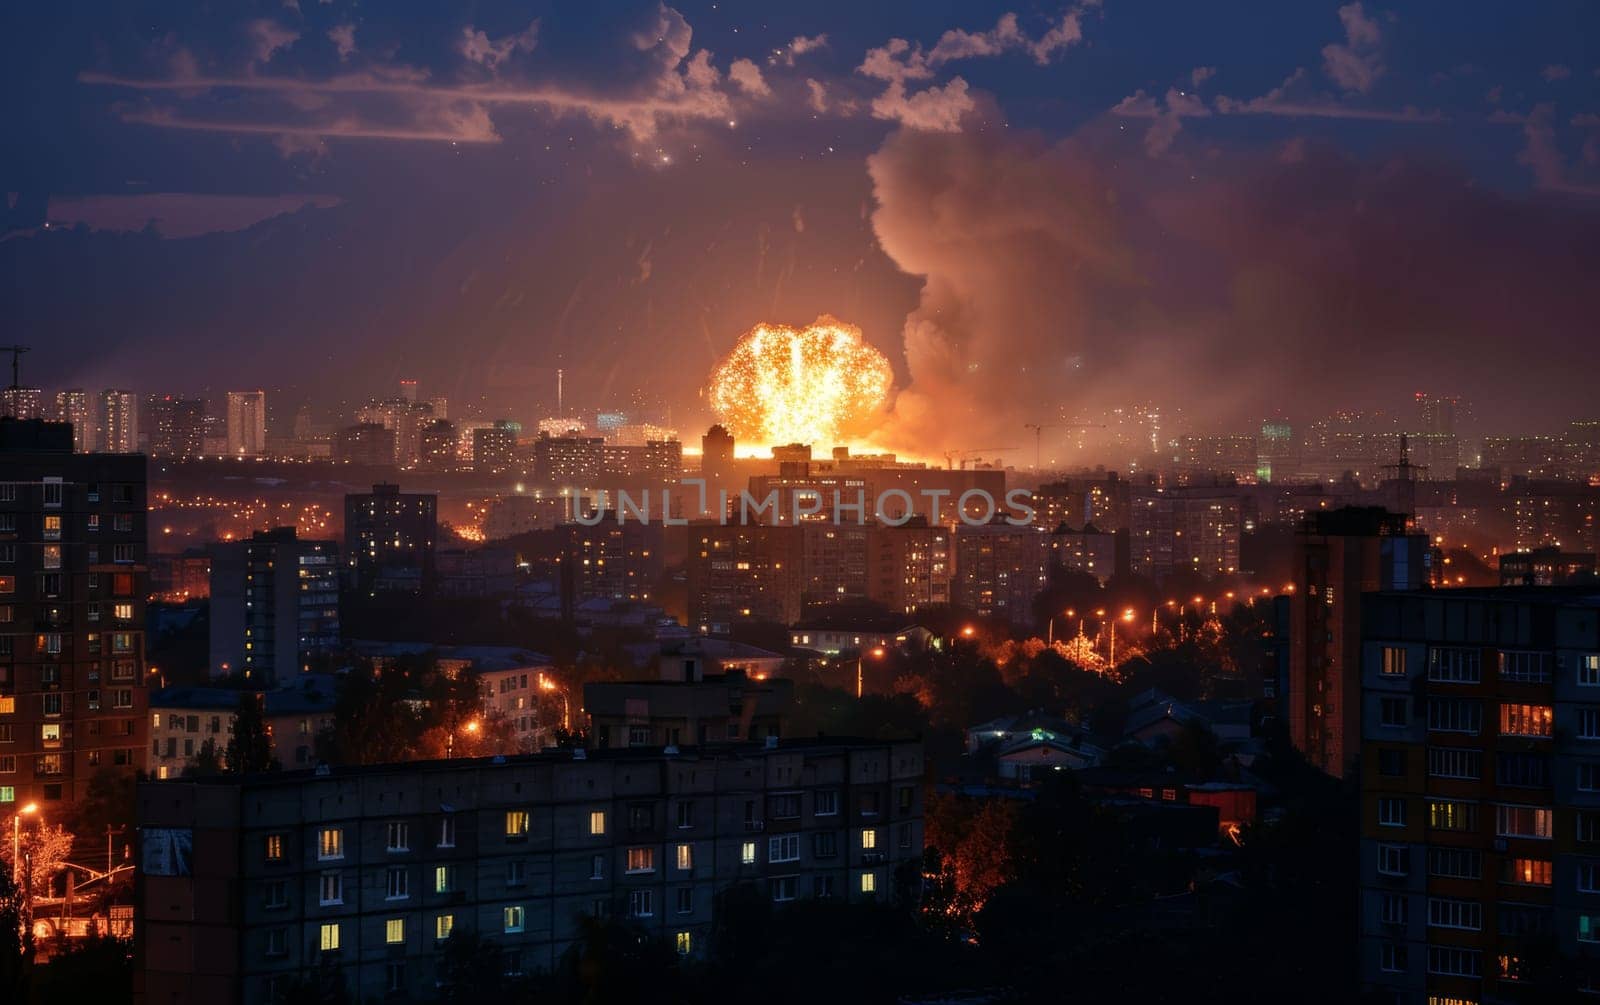 The fiery explosion over a city at twilight paints a scene of chaos and beauty, a juxtaposition of destruction against the quiet night.